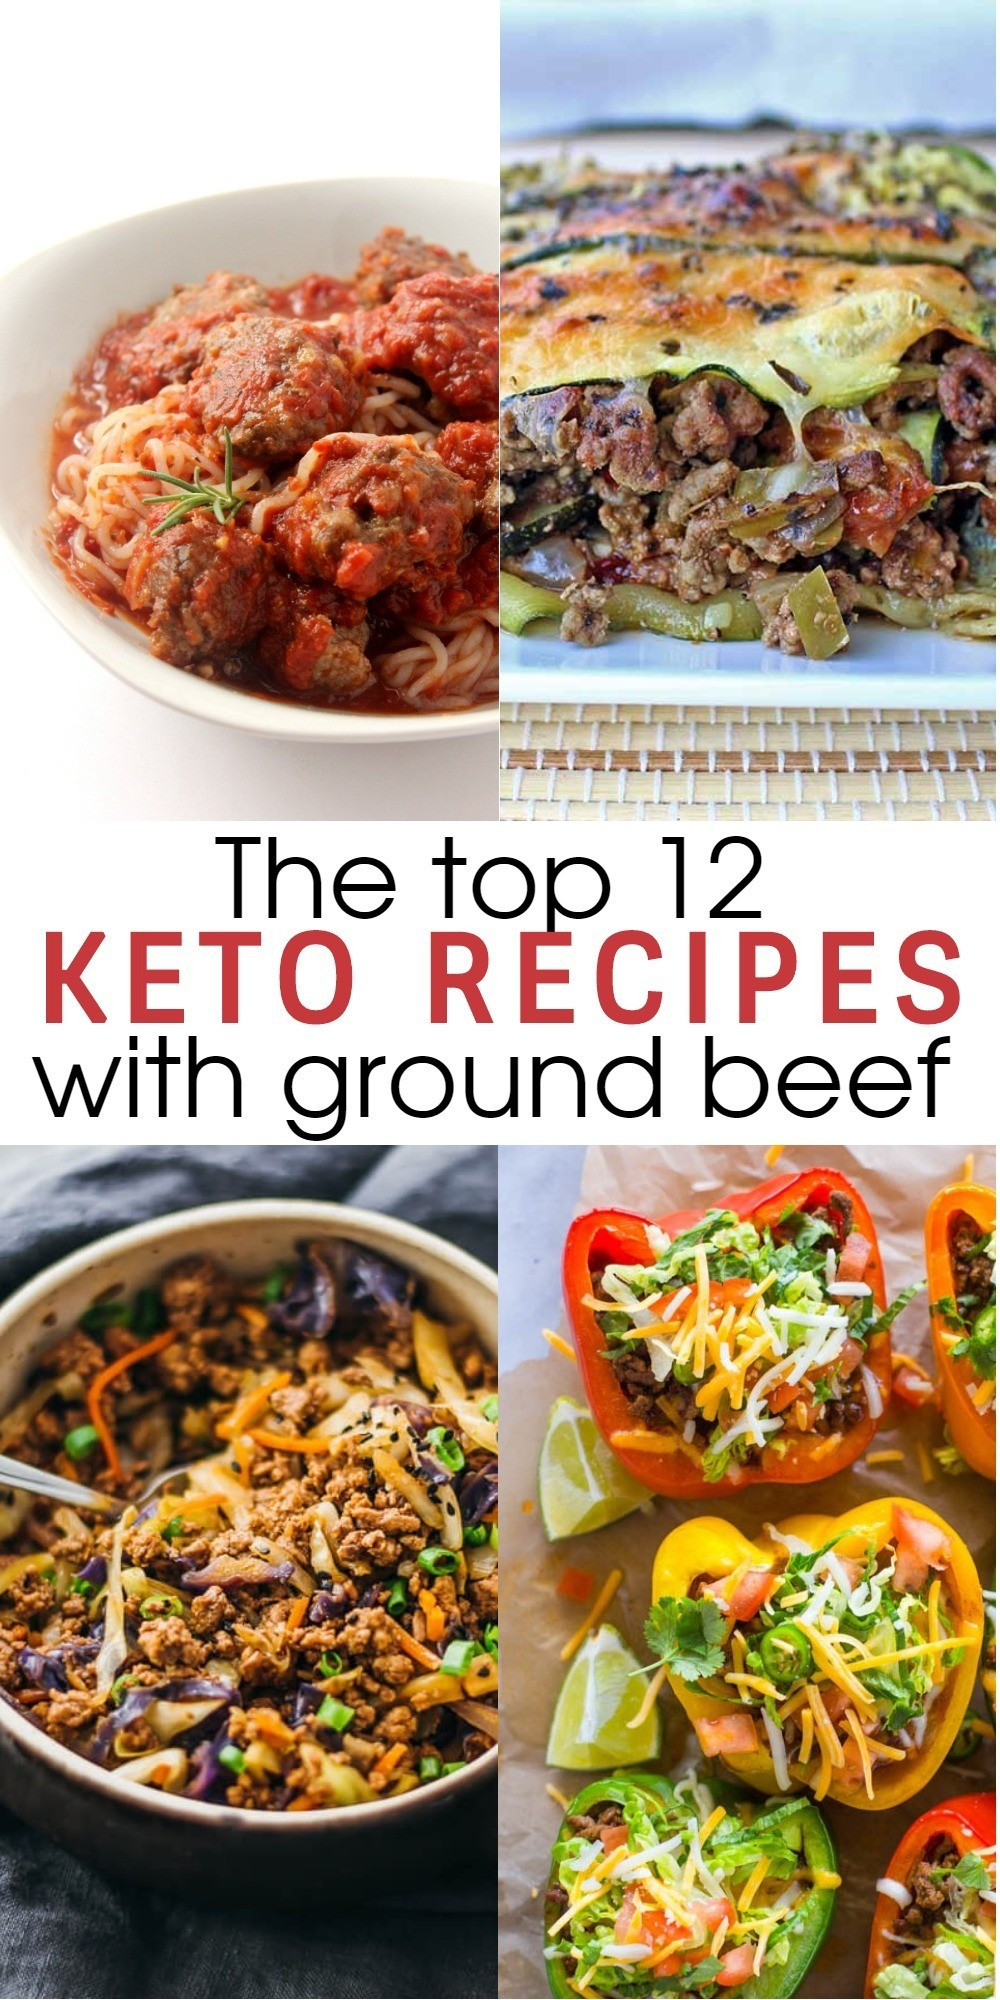 Keto Diet Recipes Beef
 12 Flavorful and Easy Keto Recipes With Ground Beef To Try